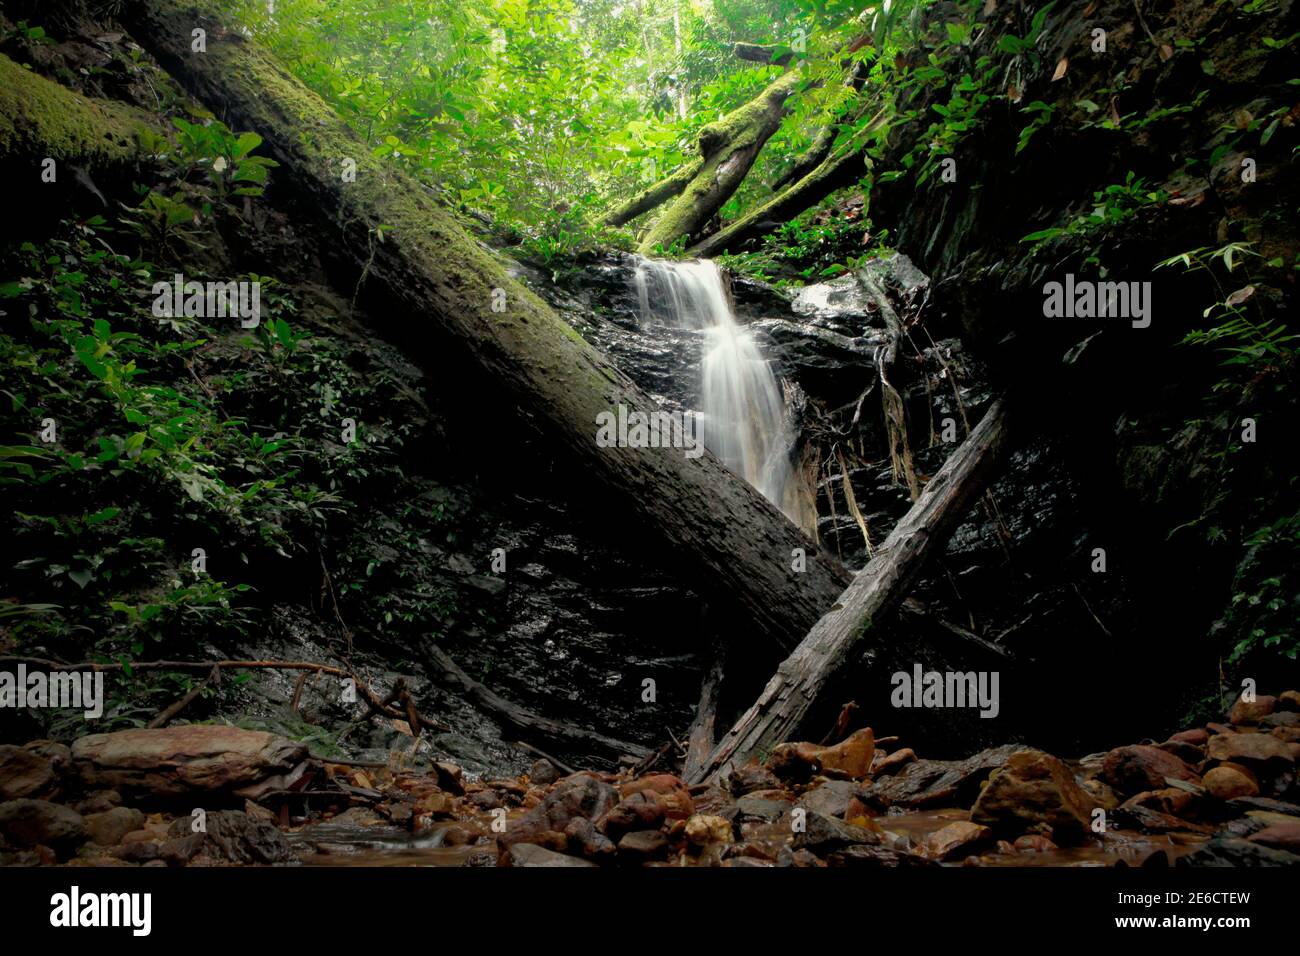 A small waterfall on the bed of a narrow creek in the middle of Kalimantan rainforest, Indonesia. Stock Photo